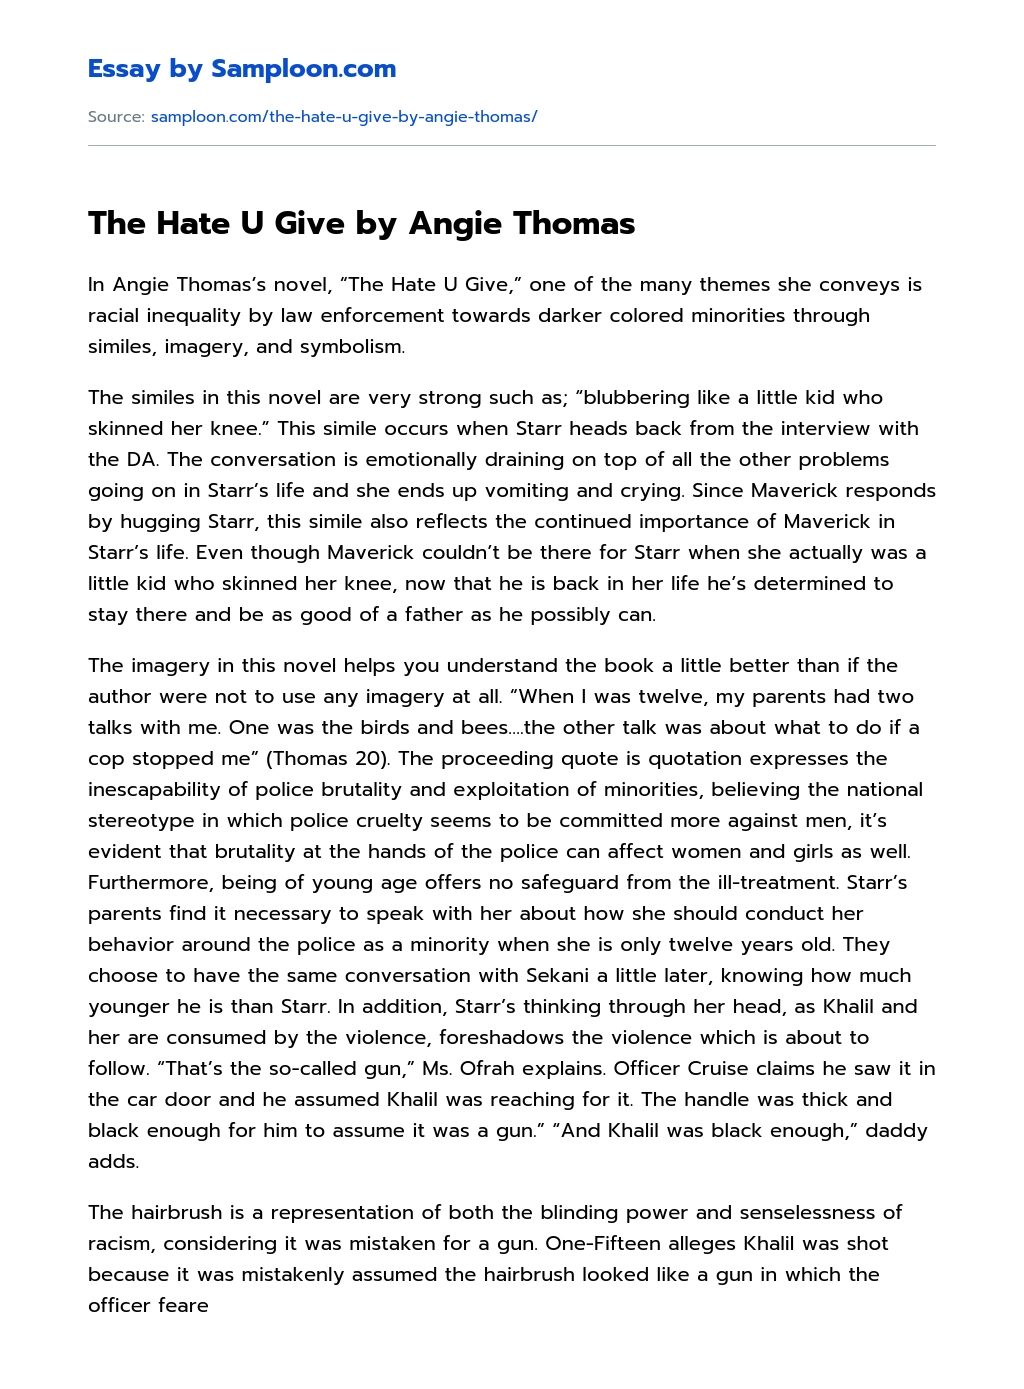 The Hate U Give by Angie Thomas Argumentative Essay essay